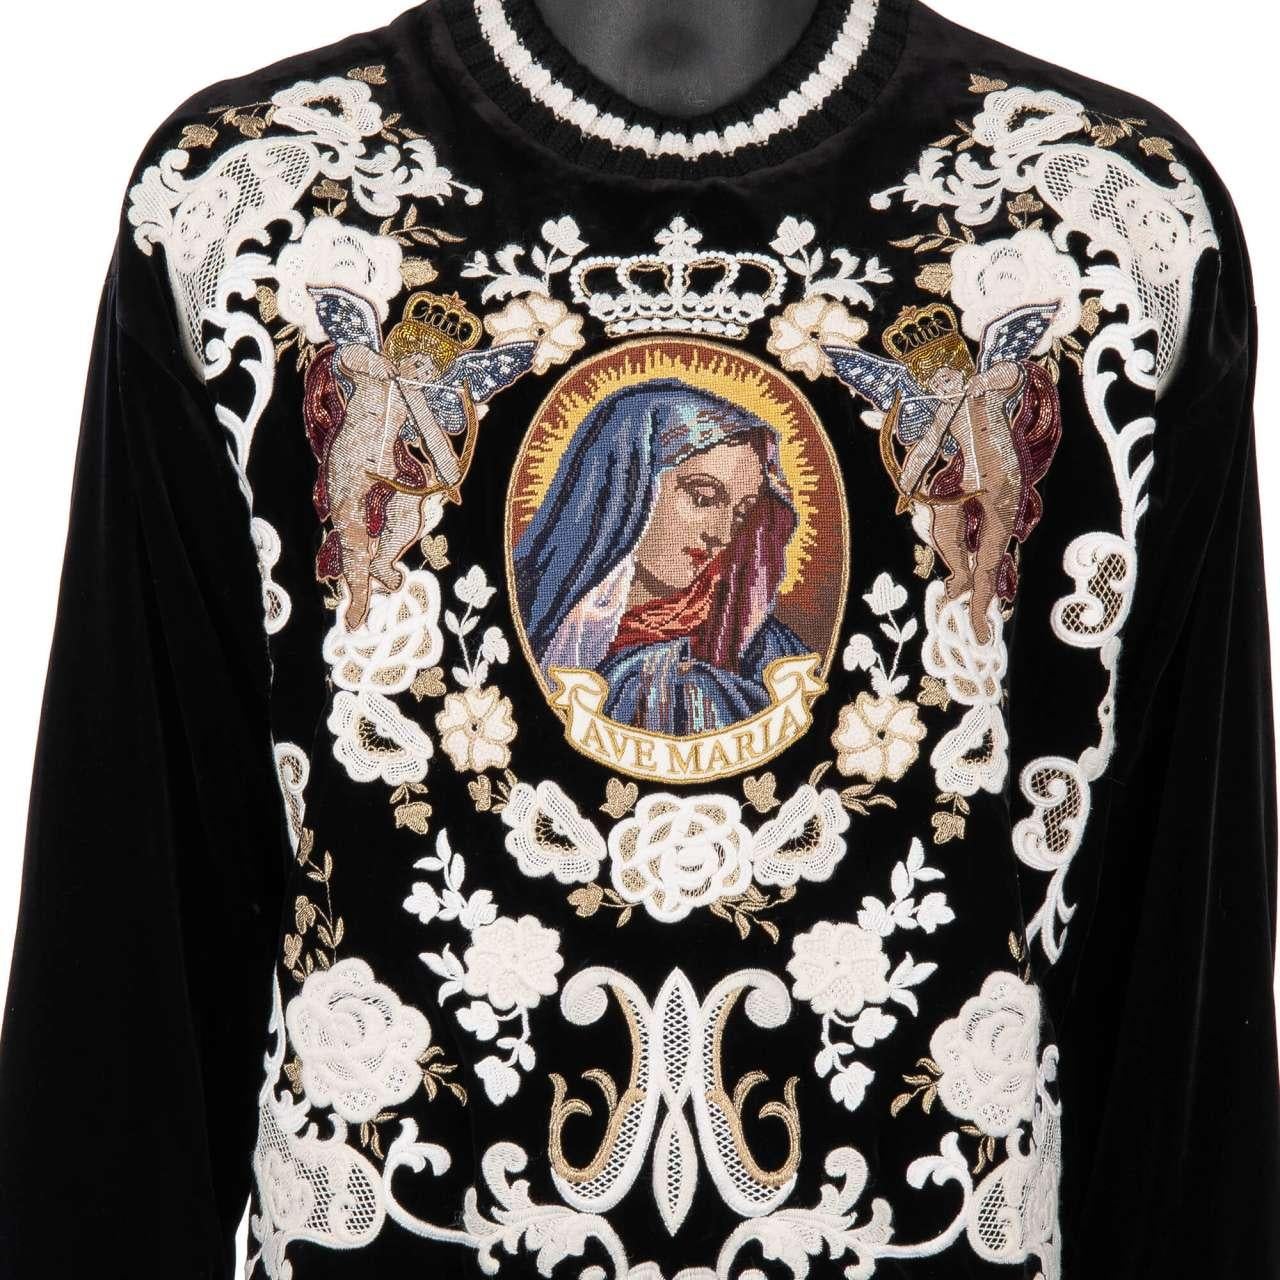 - Exceptional and rare embroidered Ave Maria sweater / sweatshirt with Maria, Angels and flowers hand embroidery by DOLCE & GABBANA - RUNWAY - Dolce & Gabbana Fashion Show - New with Tags - Former RRP: EUR 4.500 - MADE IN ITALY - Wide cut, fits